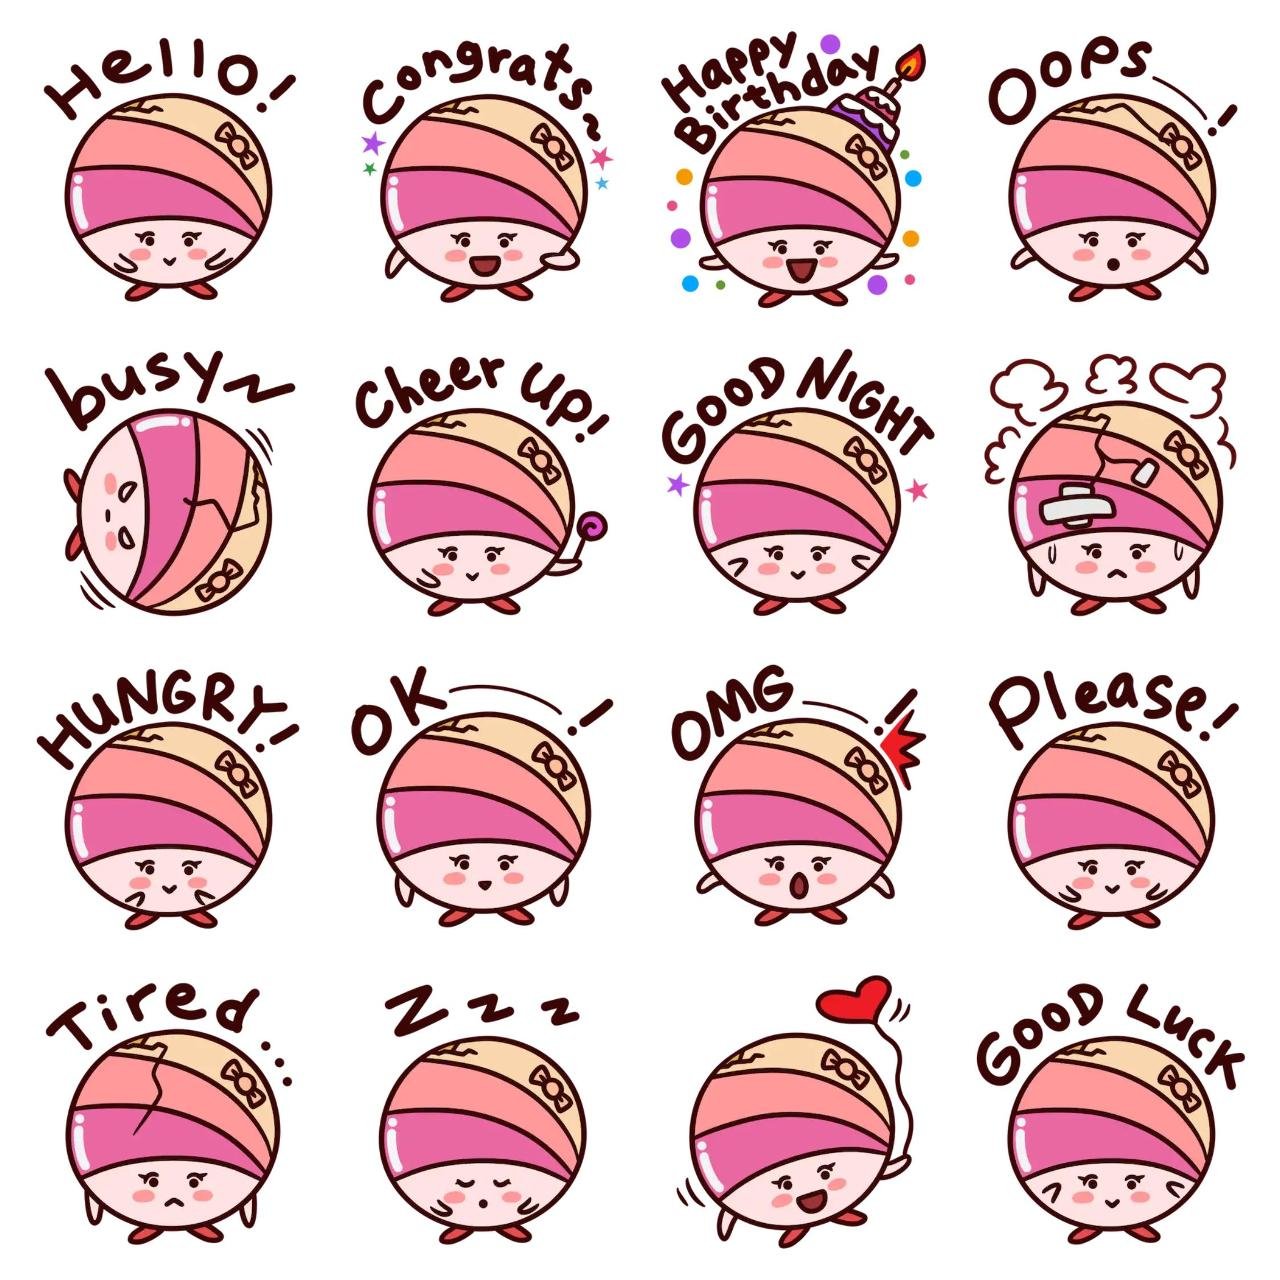 Glass Bead Girl 2 Animation/Cartoon,Etc. sticker pack for Whatsapp, Telegram, Signal, and others chatting and message apps